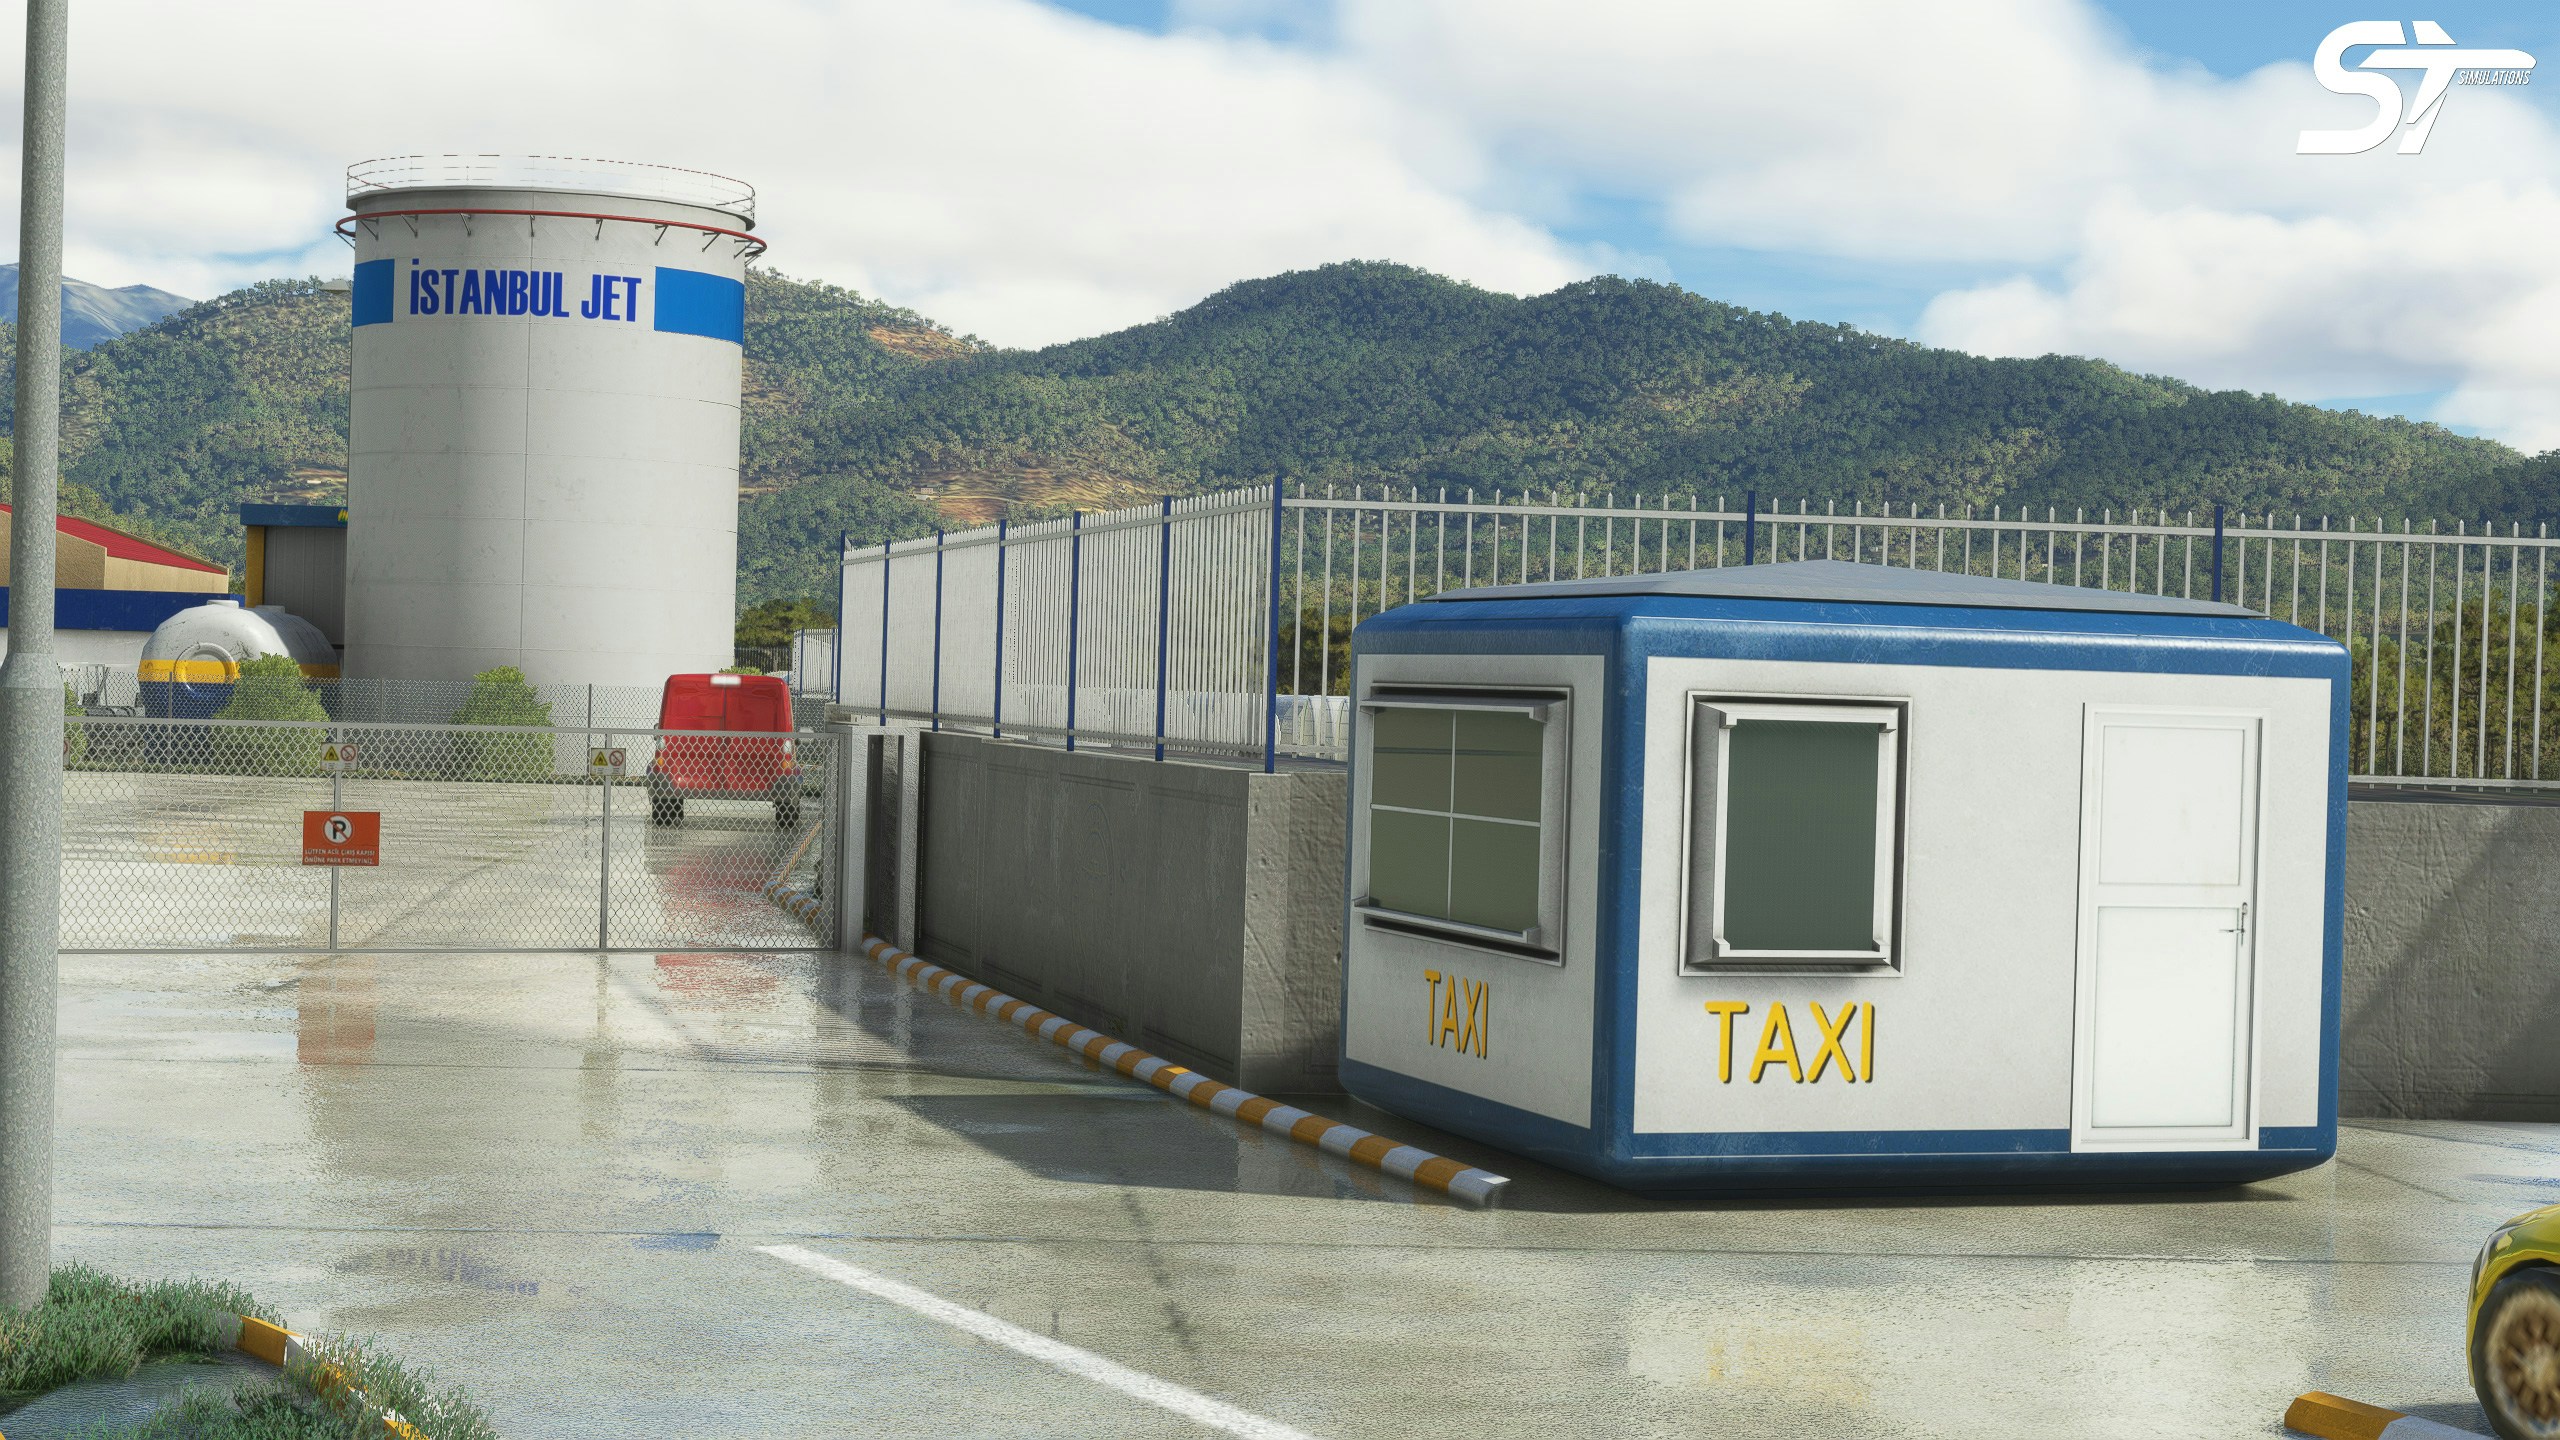 ST Simulations Releases Gazipasa-Alanya Airport for MSFS